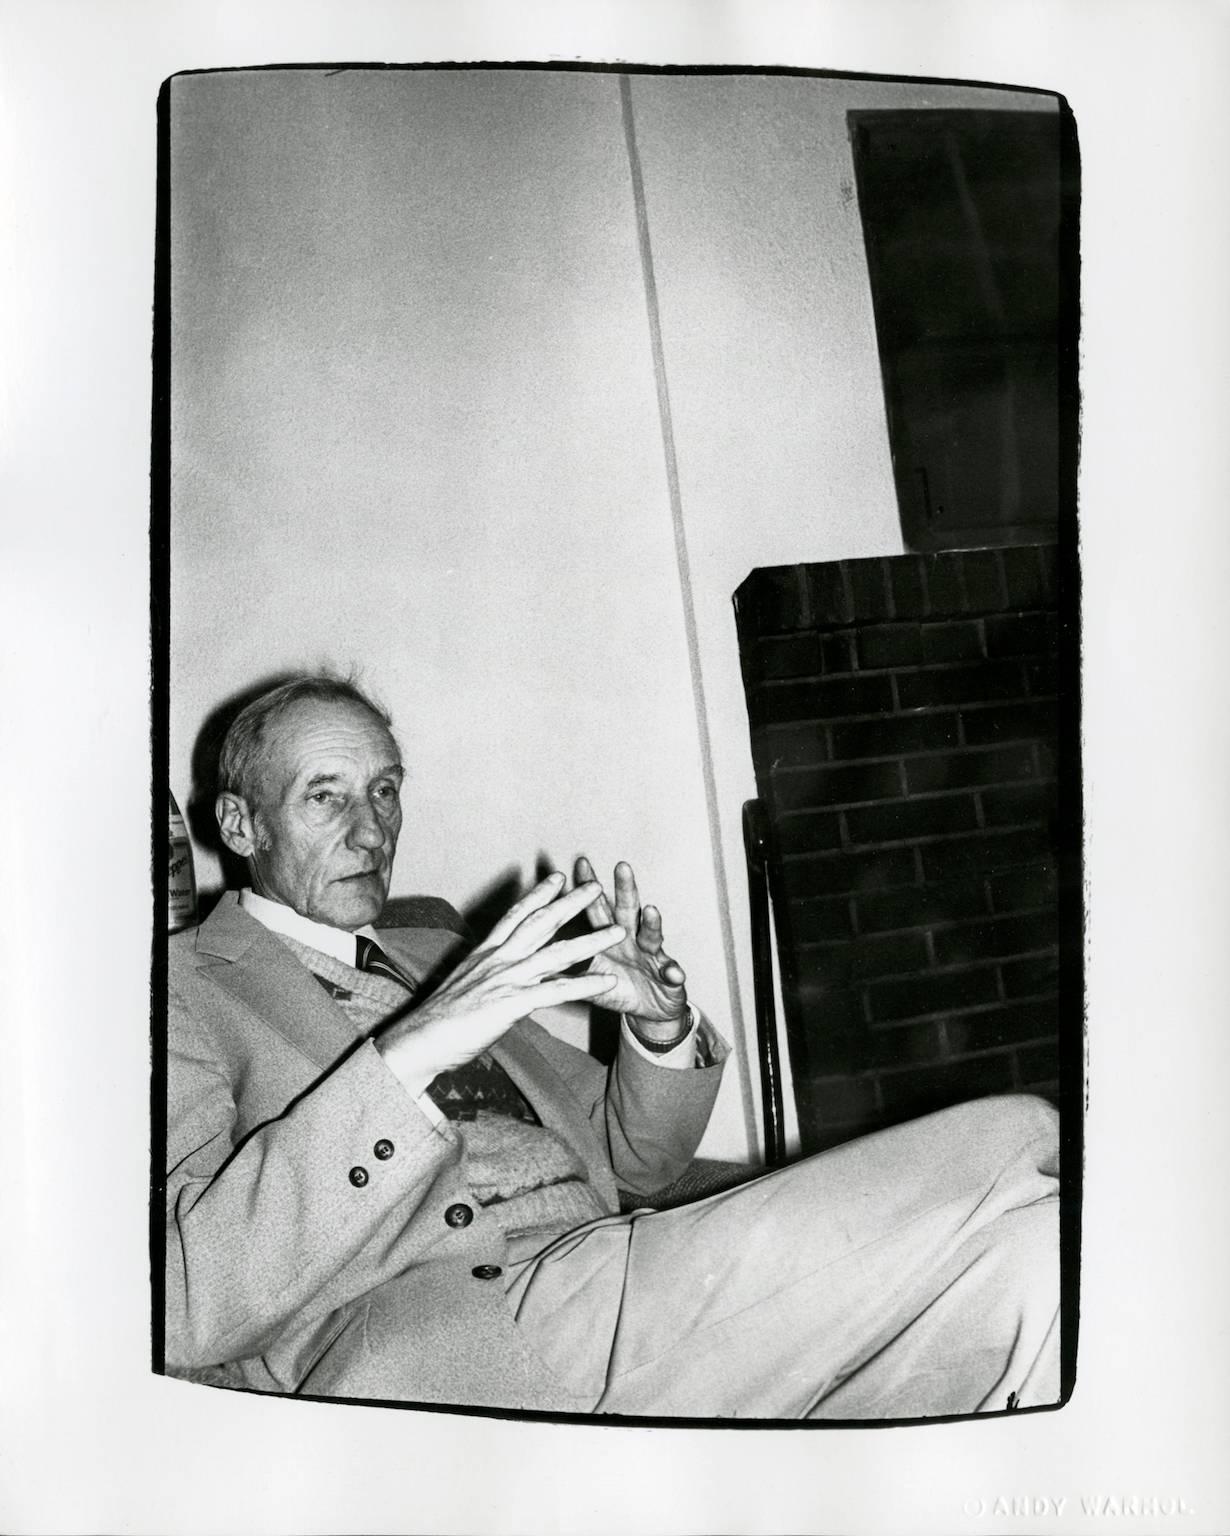 Photograph of William S. Burroughs at the Chelsea Hotel